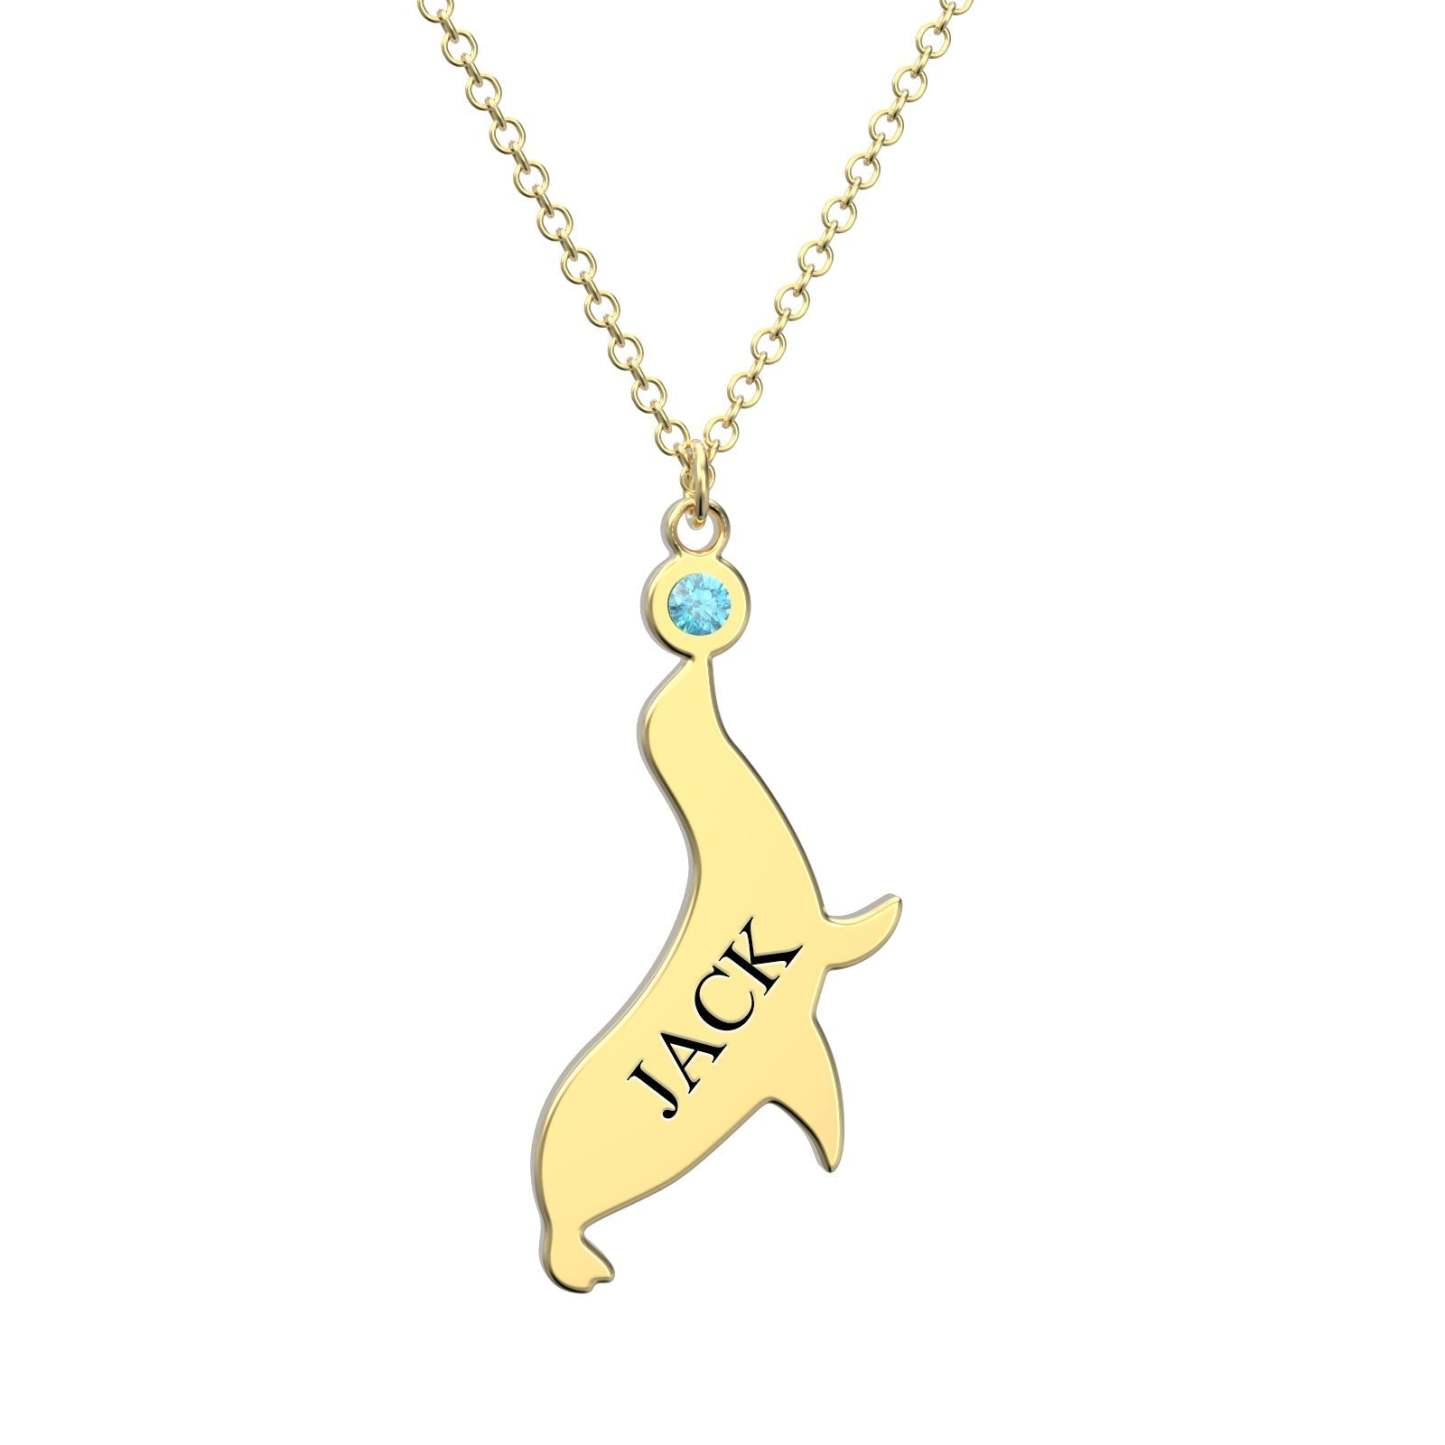 Personalized Engraved Necklace with Birthstone Dolphin Necklace for Little Girl - 